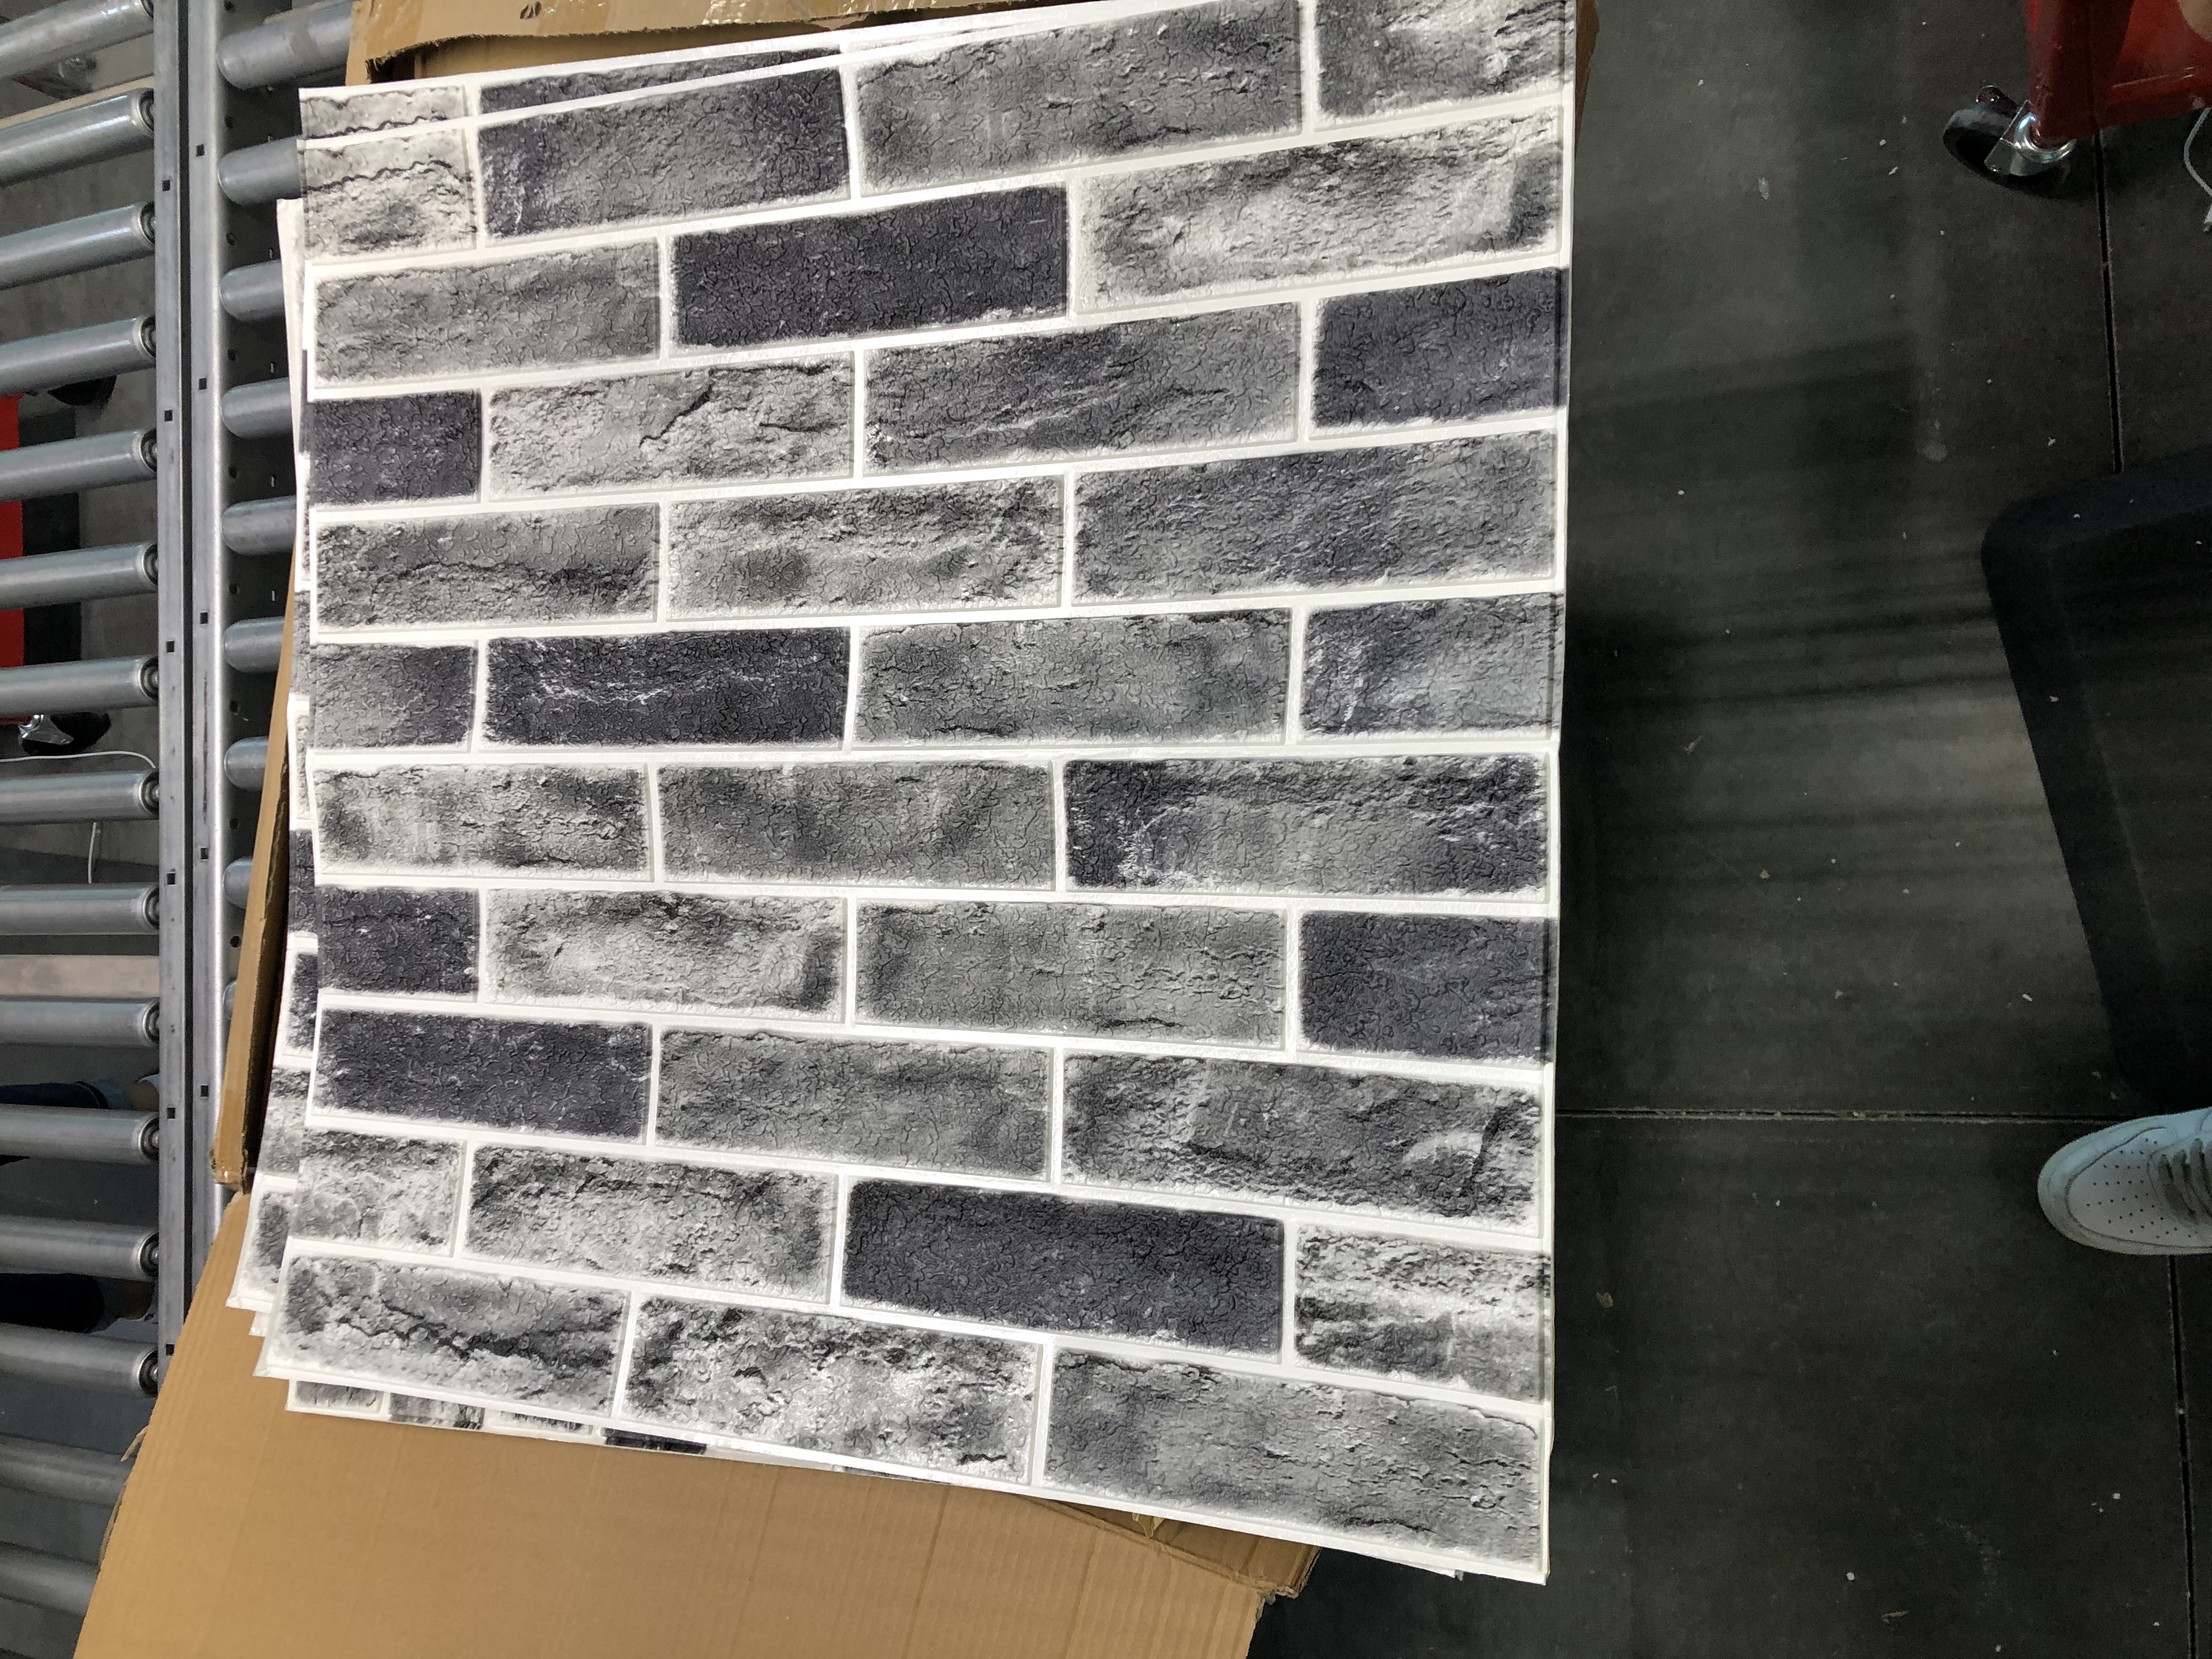 Photo 3 of Art3d 10-Pack 52.5 Sq.Ft Faux Brick 3D Wall Panels Peel and Stick in Stone Ash, Self Adhesive Waterproof Foam Wallpaper for Bedroom, Bathroom, Kitchen 10 Stone ash